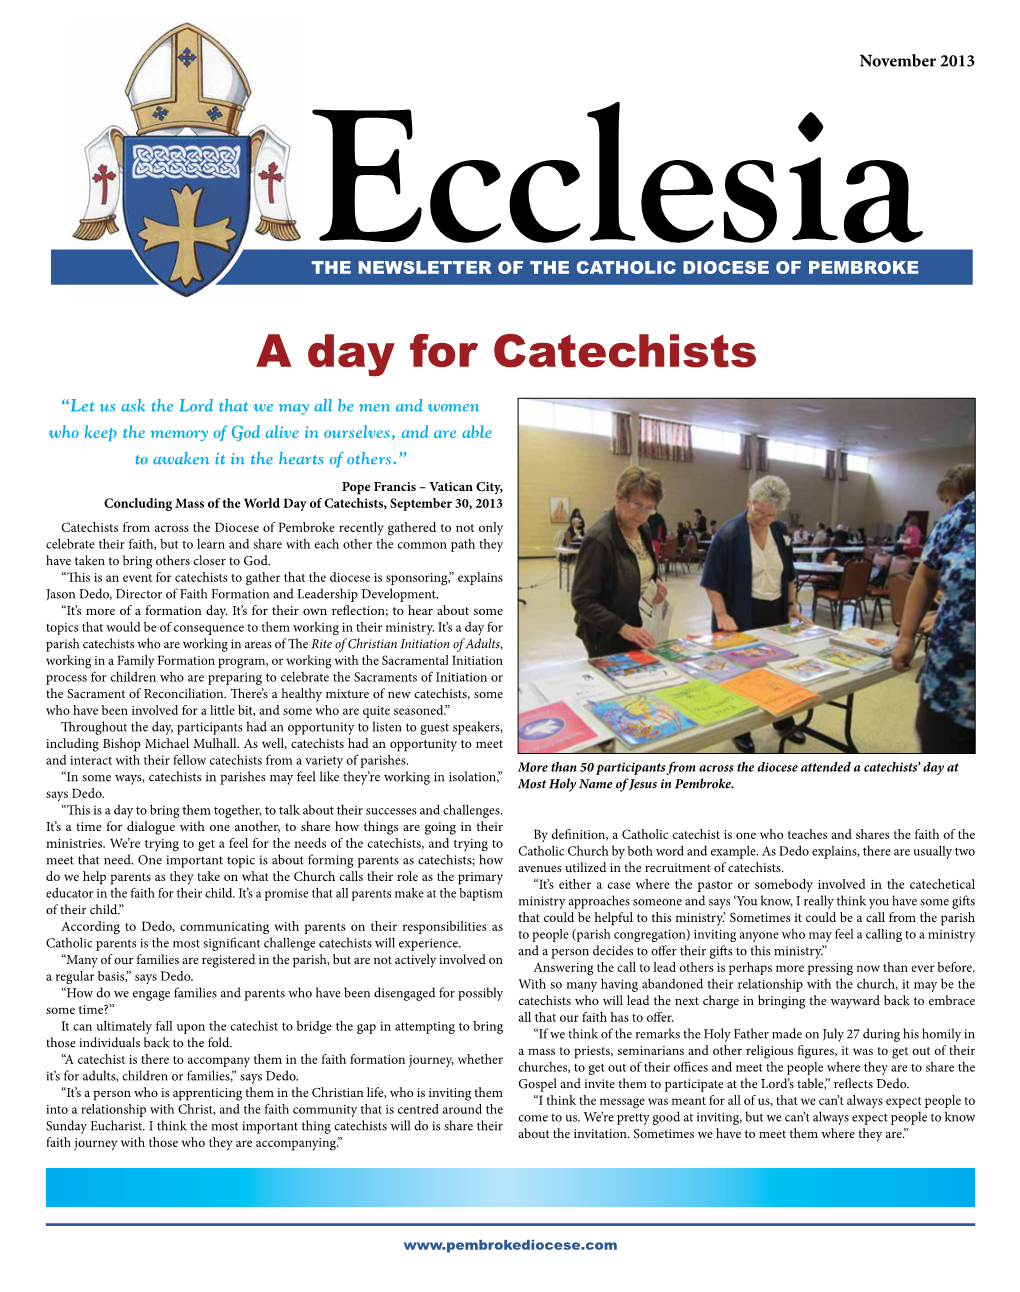 A Day for Catechists